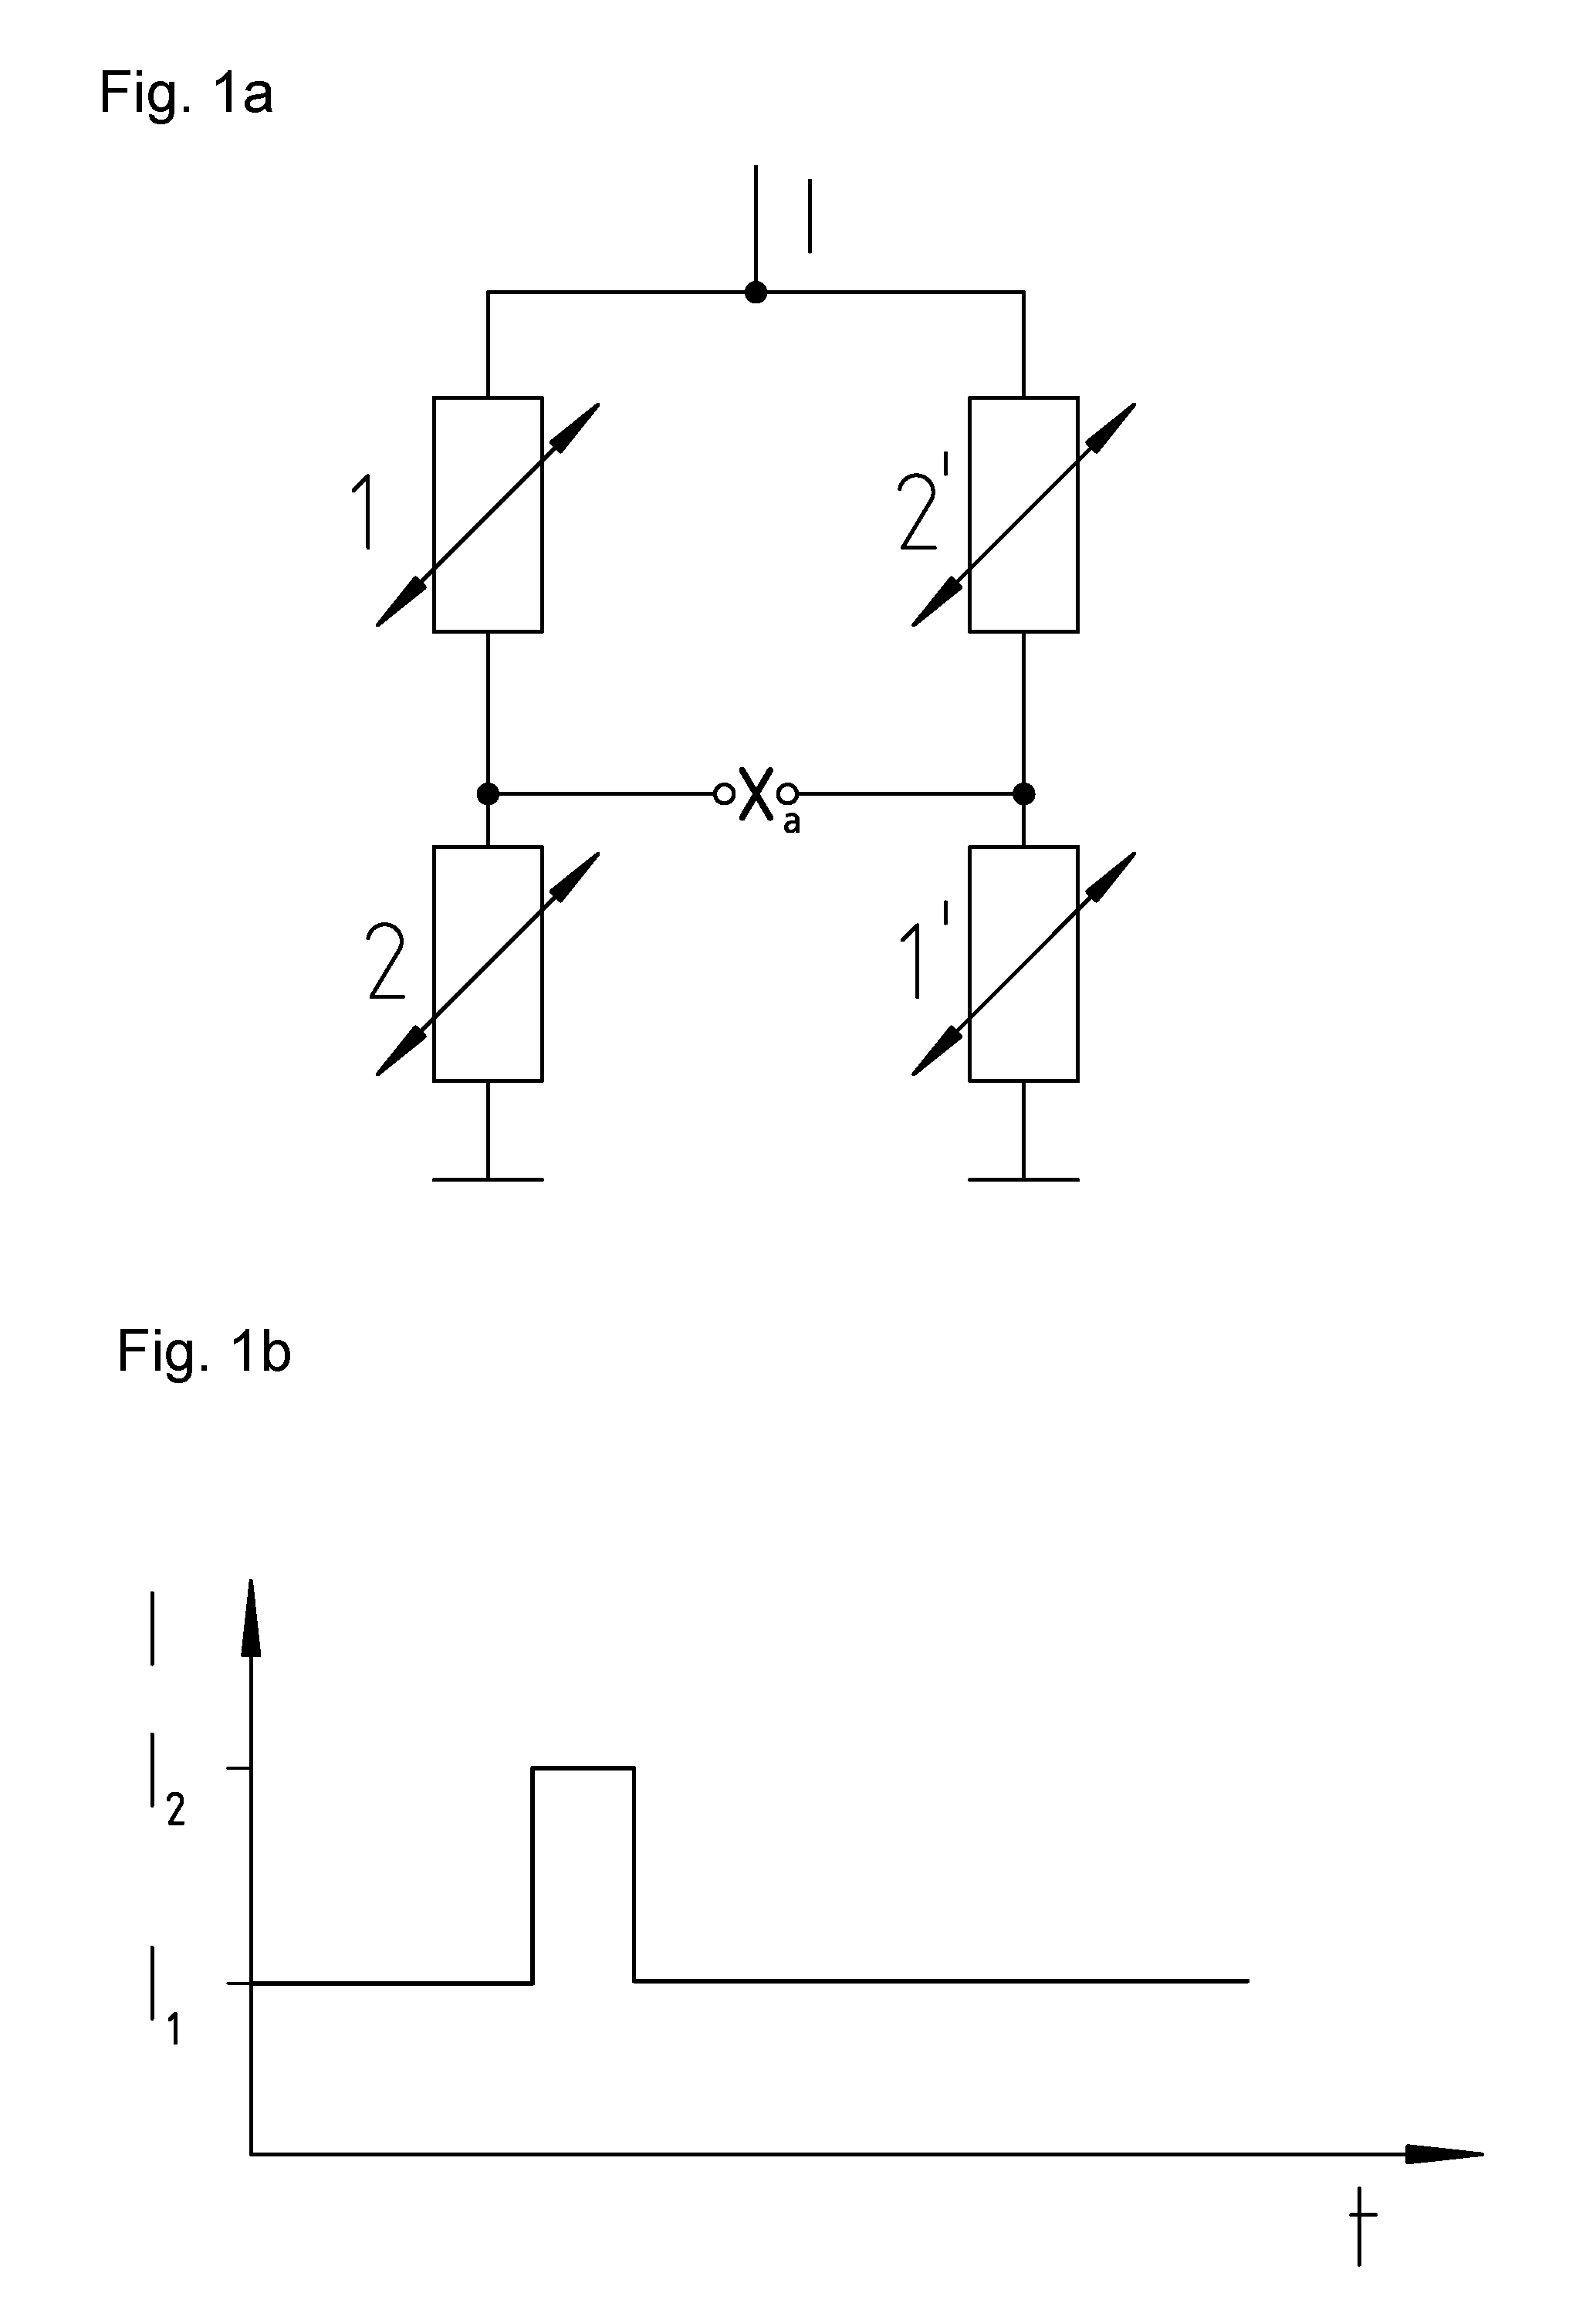 Method For Determining Gas Concentrations in a Gas Mixture Based on Thermal Conductivity Measurements With Correction of Measured Values